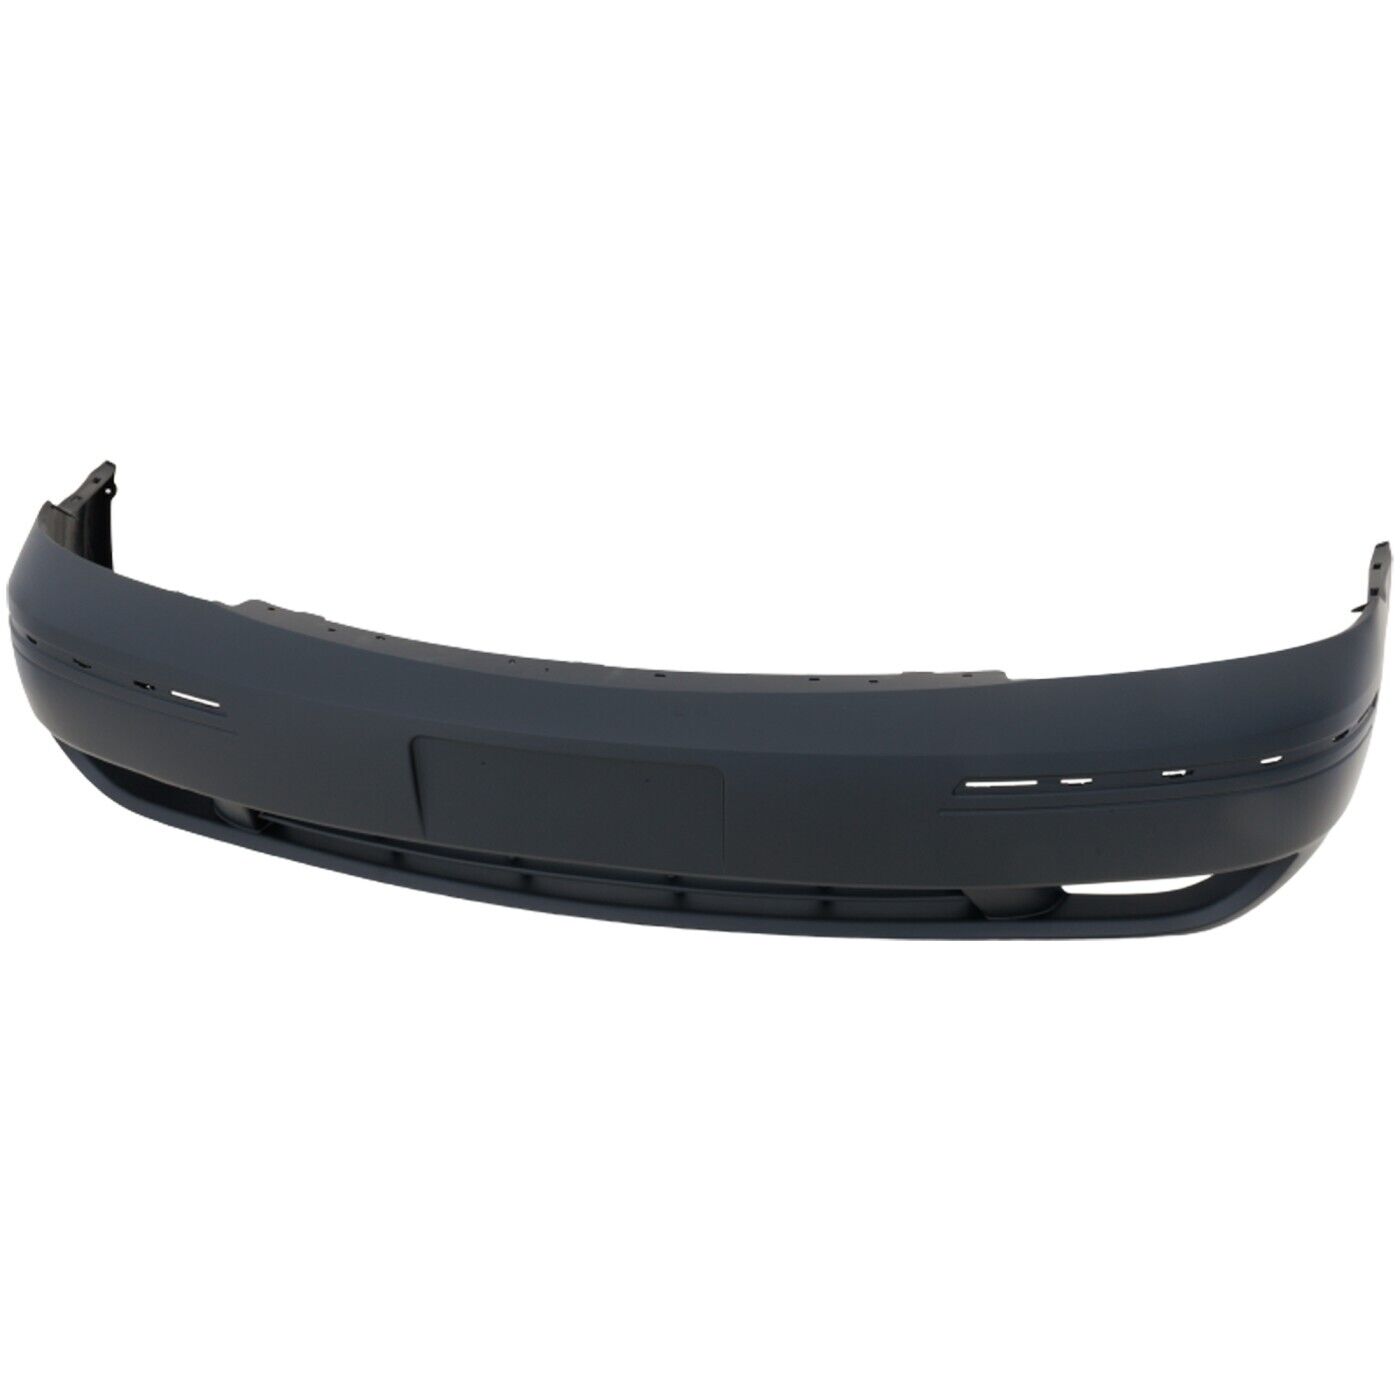 NEW Primed Front Bumper Cover For 2005 2006 2007 Ford Five Hundred 500 w/ FOG